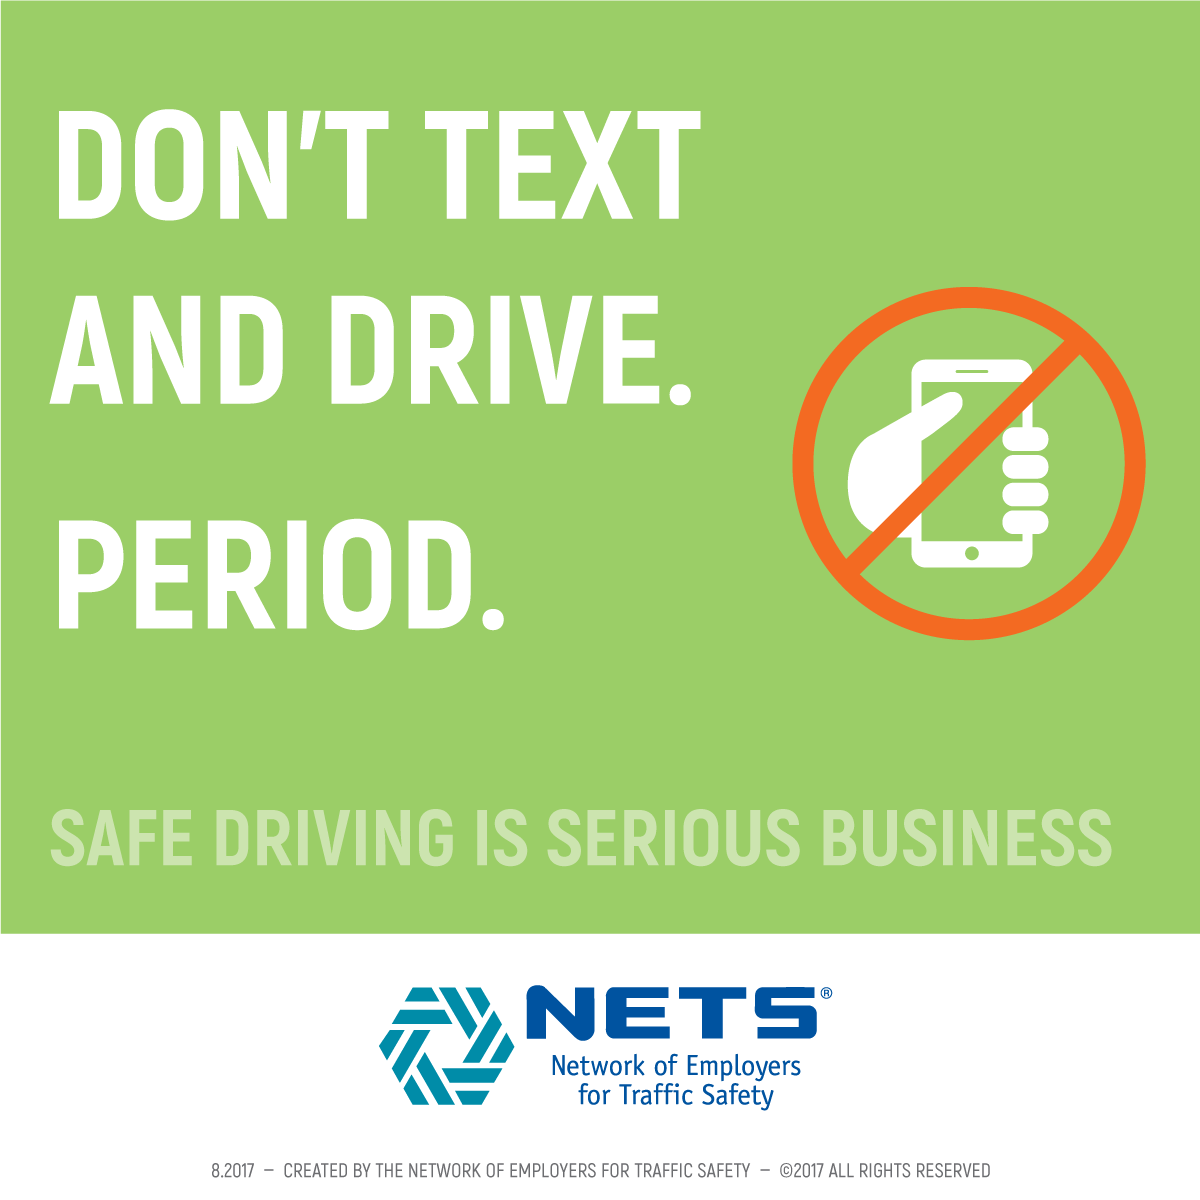 NETS Distracted Driving Infographic: Don't text and drive. Period